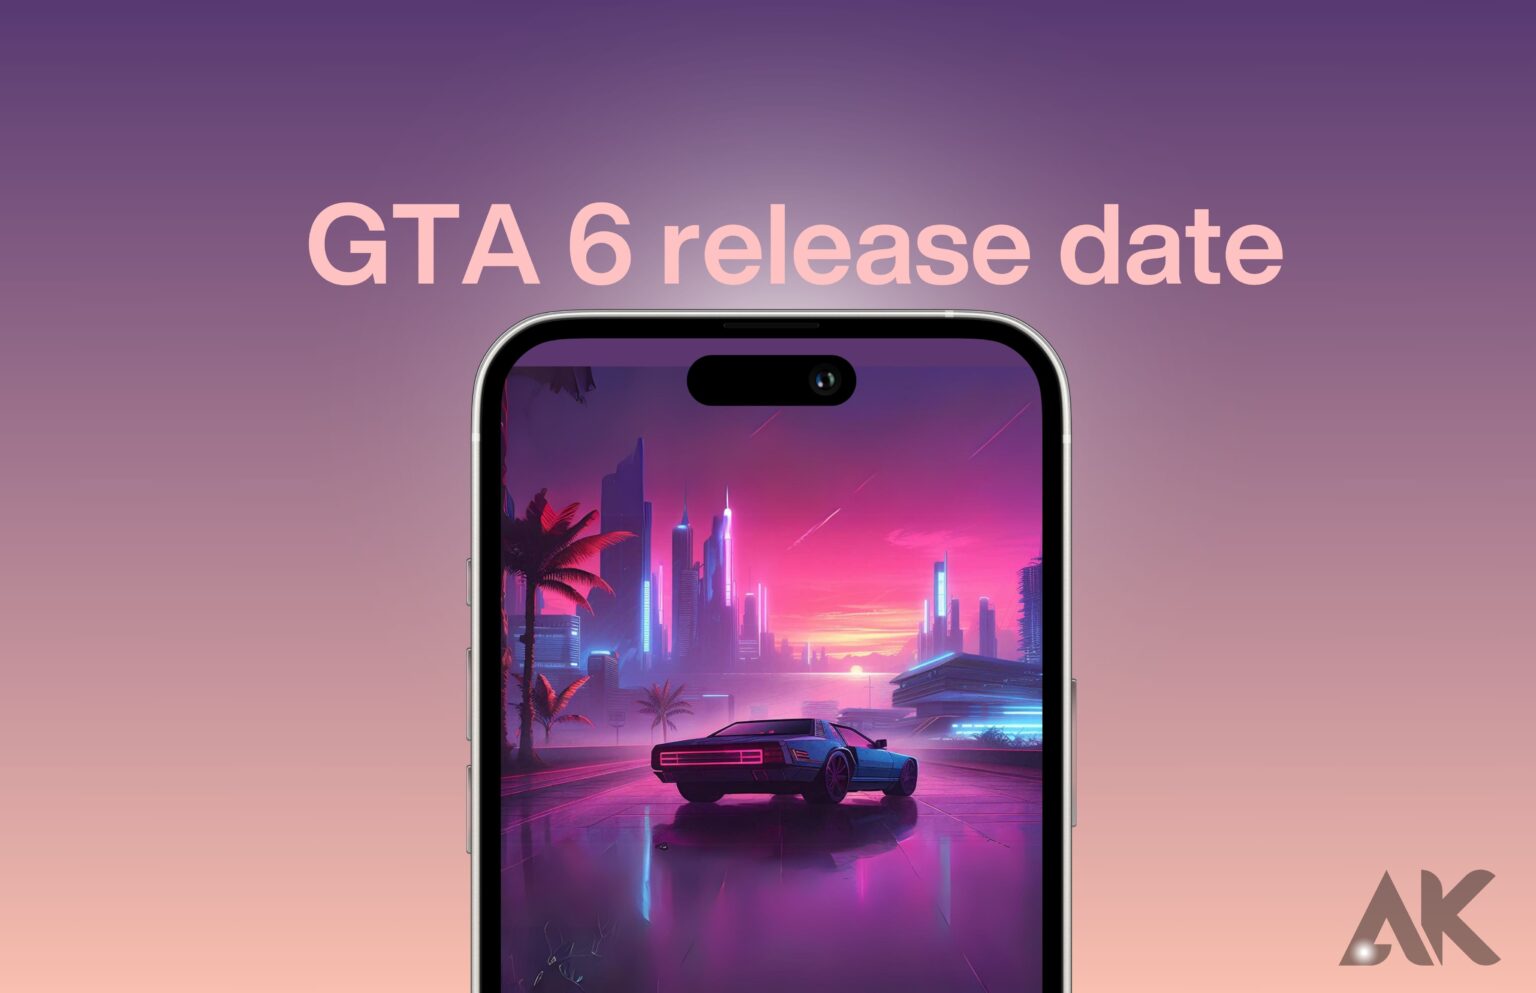 What is the GTA 6 release date?